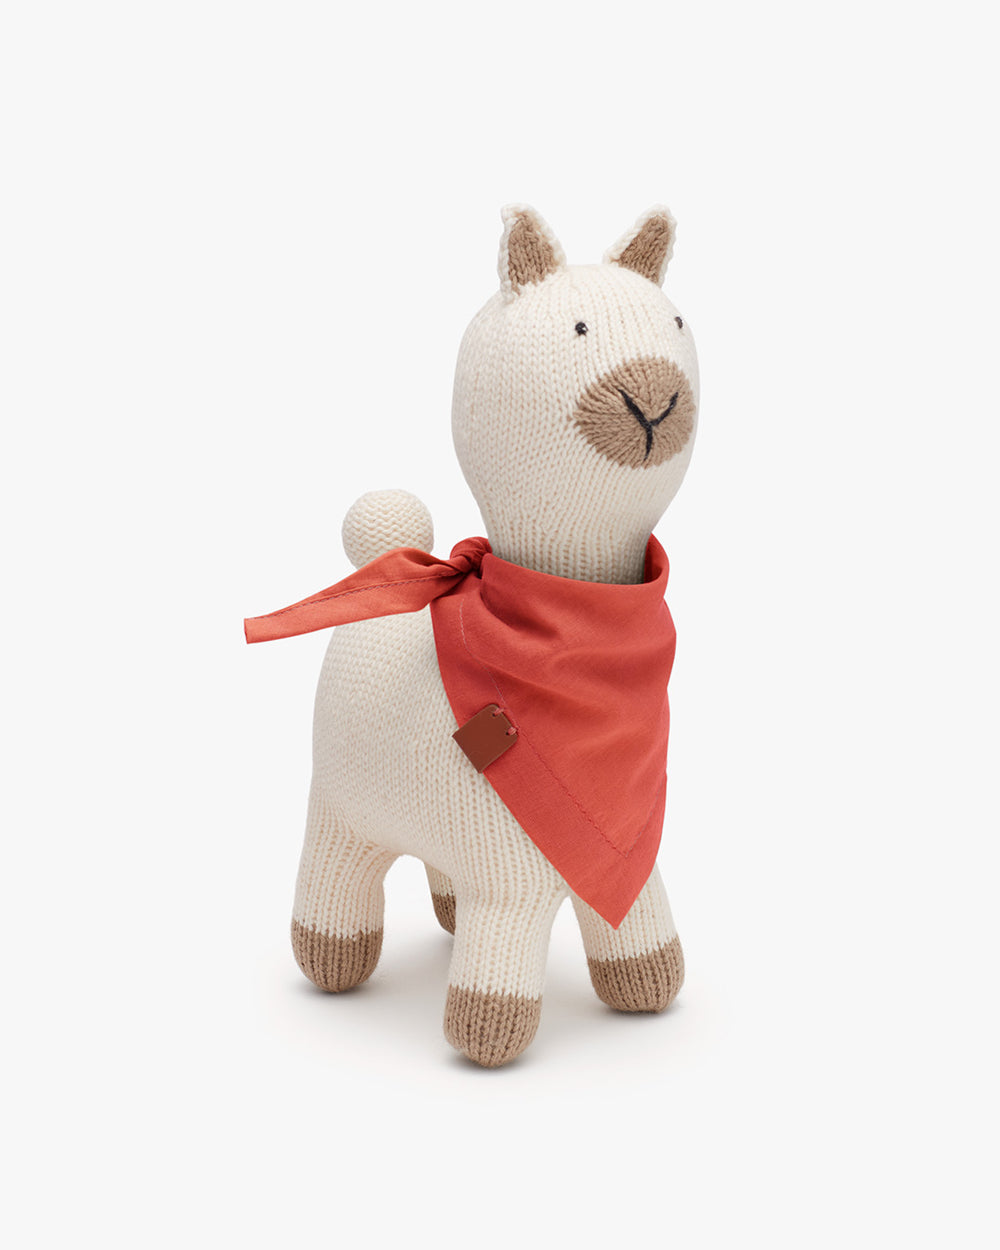 Stuffed alpaca in a standing position with a scarf around its neck.